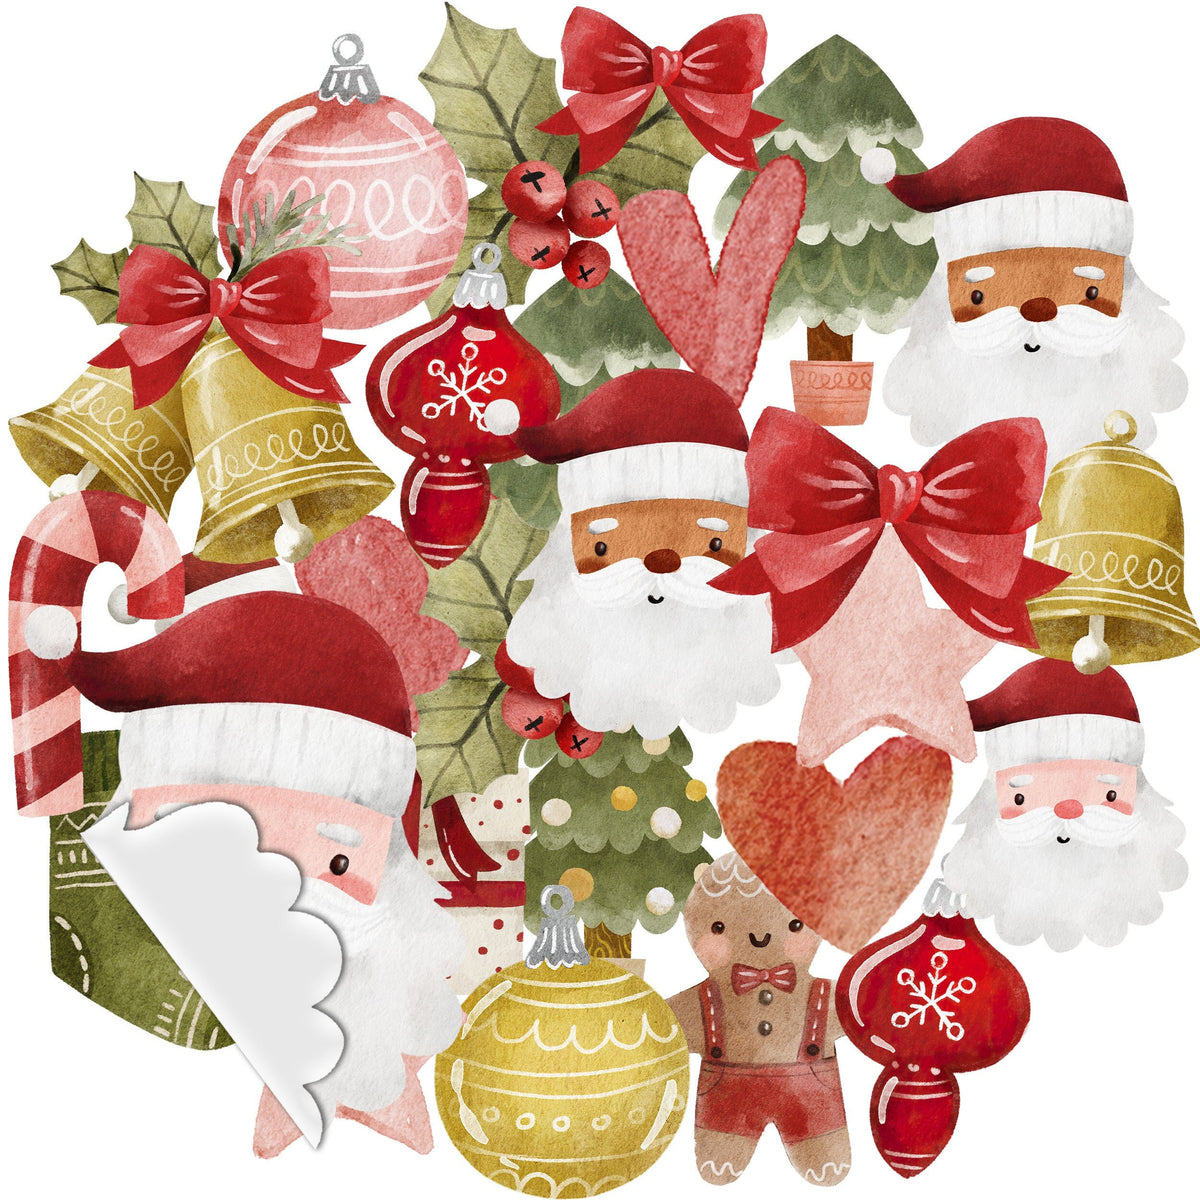 Festive Christmas Stickers Collection